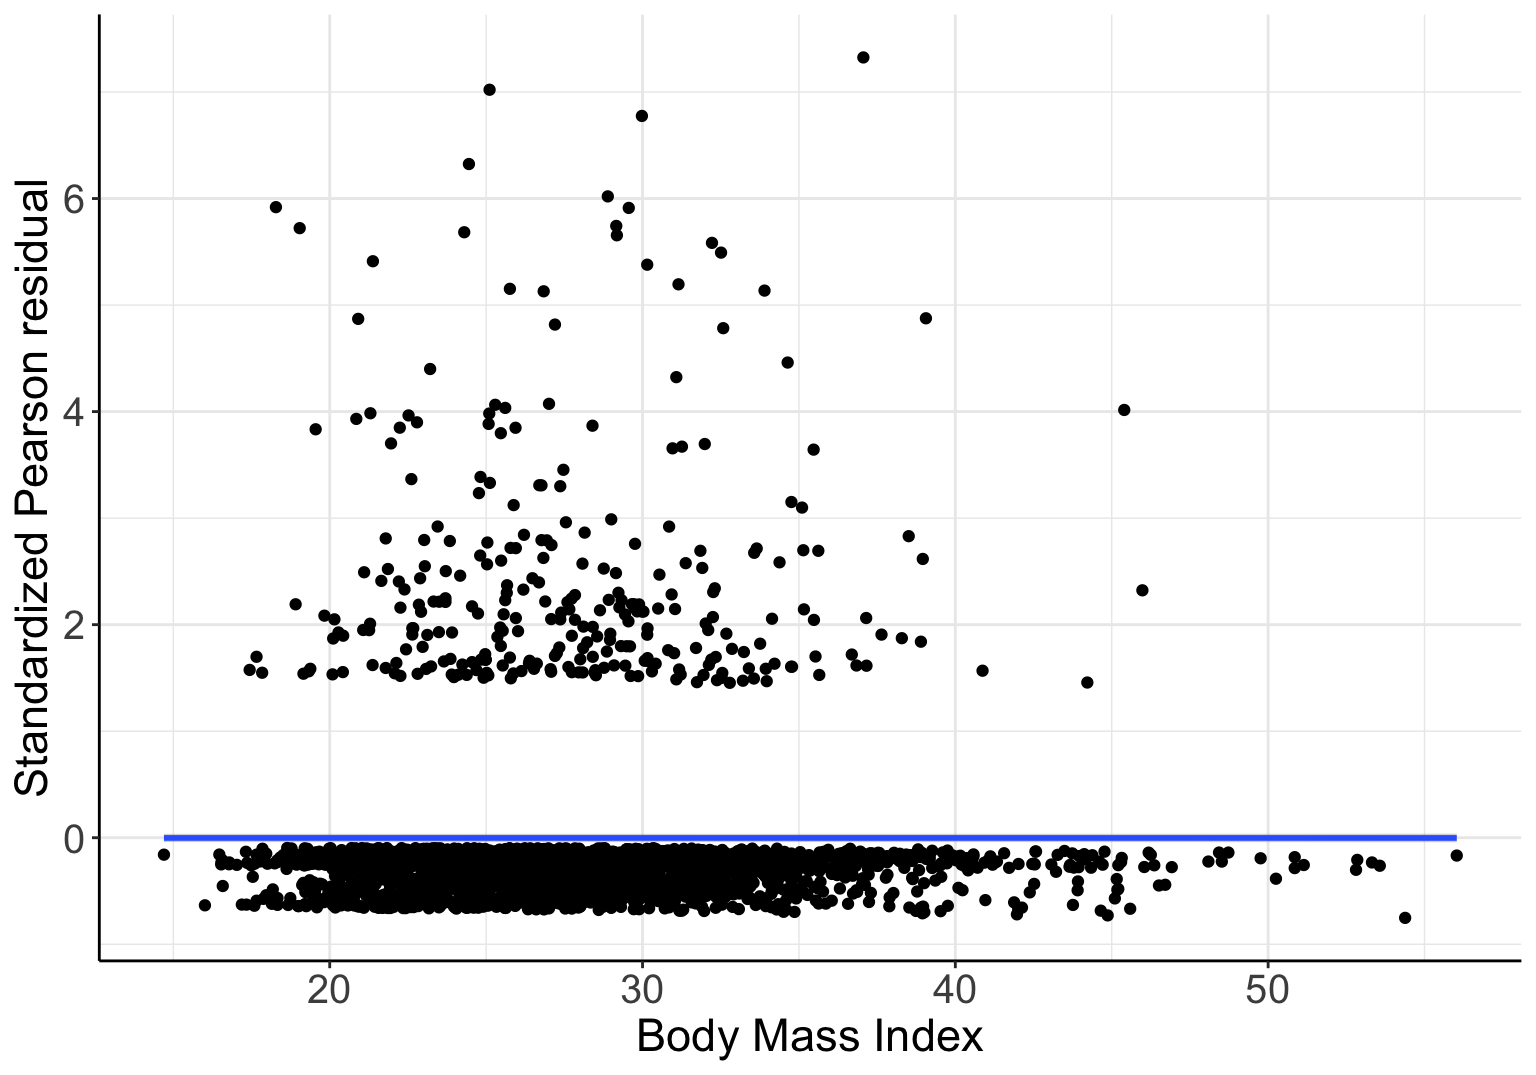 Standardized Pearson residuals agianst BMI, in logistic model with gender and linear age as covariates